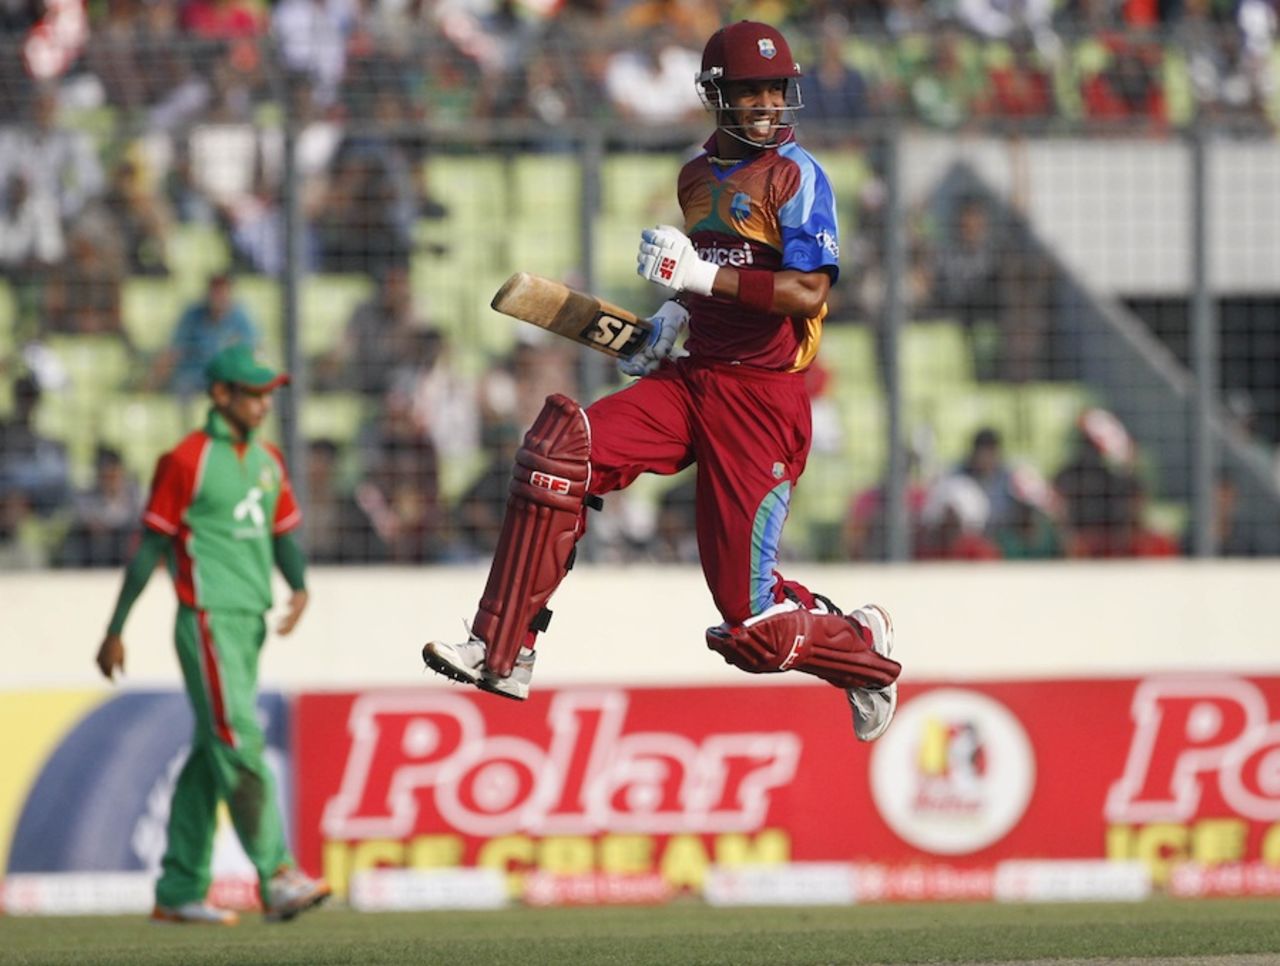 Lendl Simmons leaps in joy after scoring his maiden ODI century, Bangladesh v West Indies, 1st ODI, Mirpur, October 13, 2011